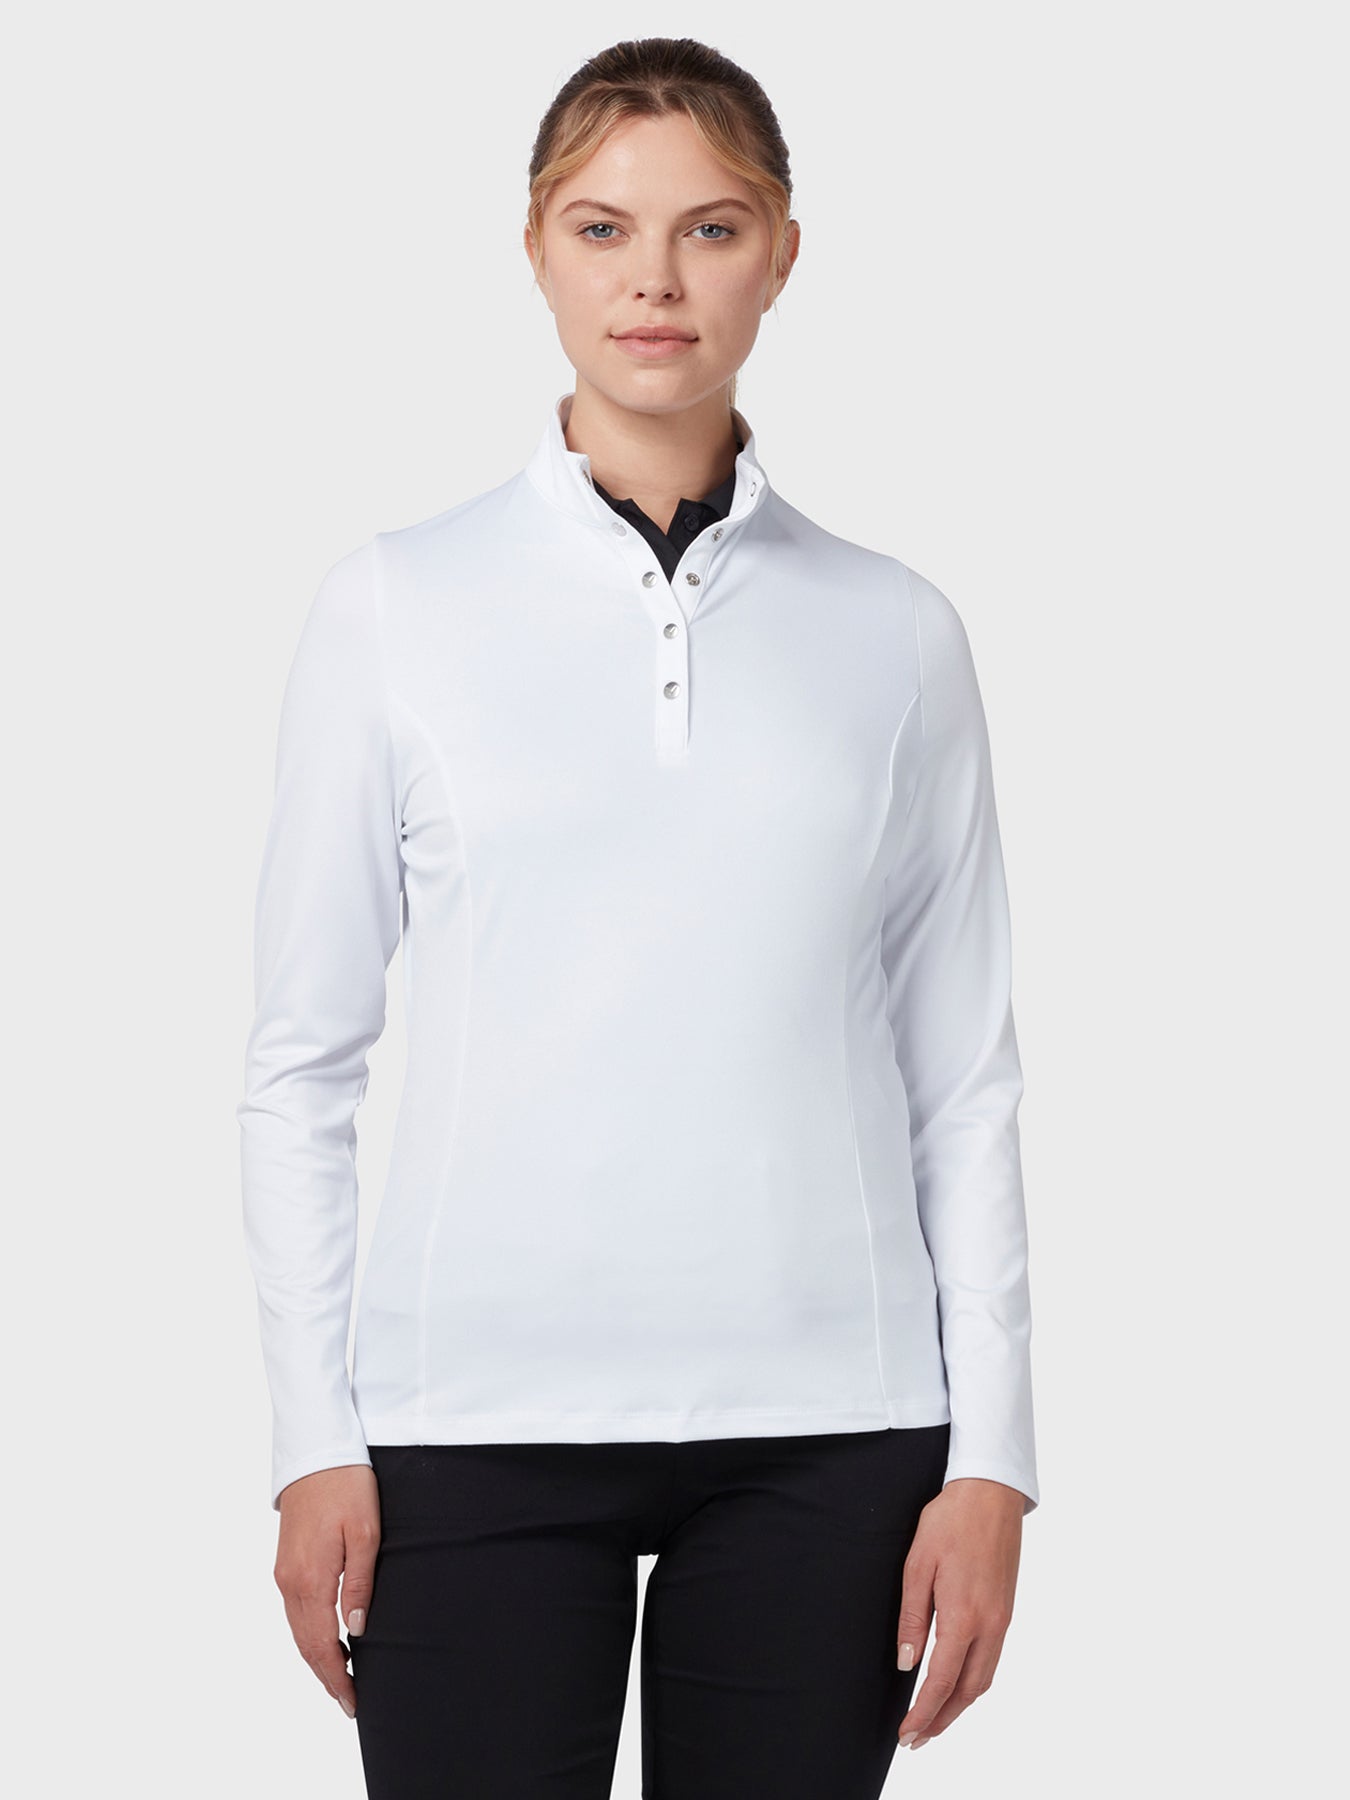 View Womens Thermal Longsleeve Fleece Back Jersey Polo In Brilliant White Brilliant White XL information